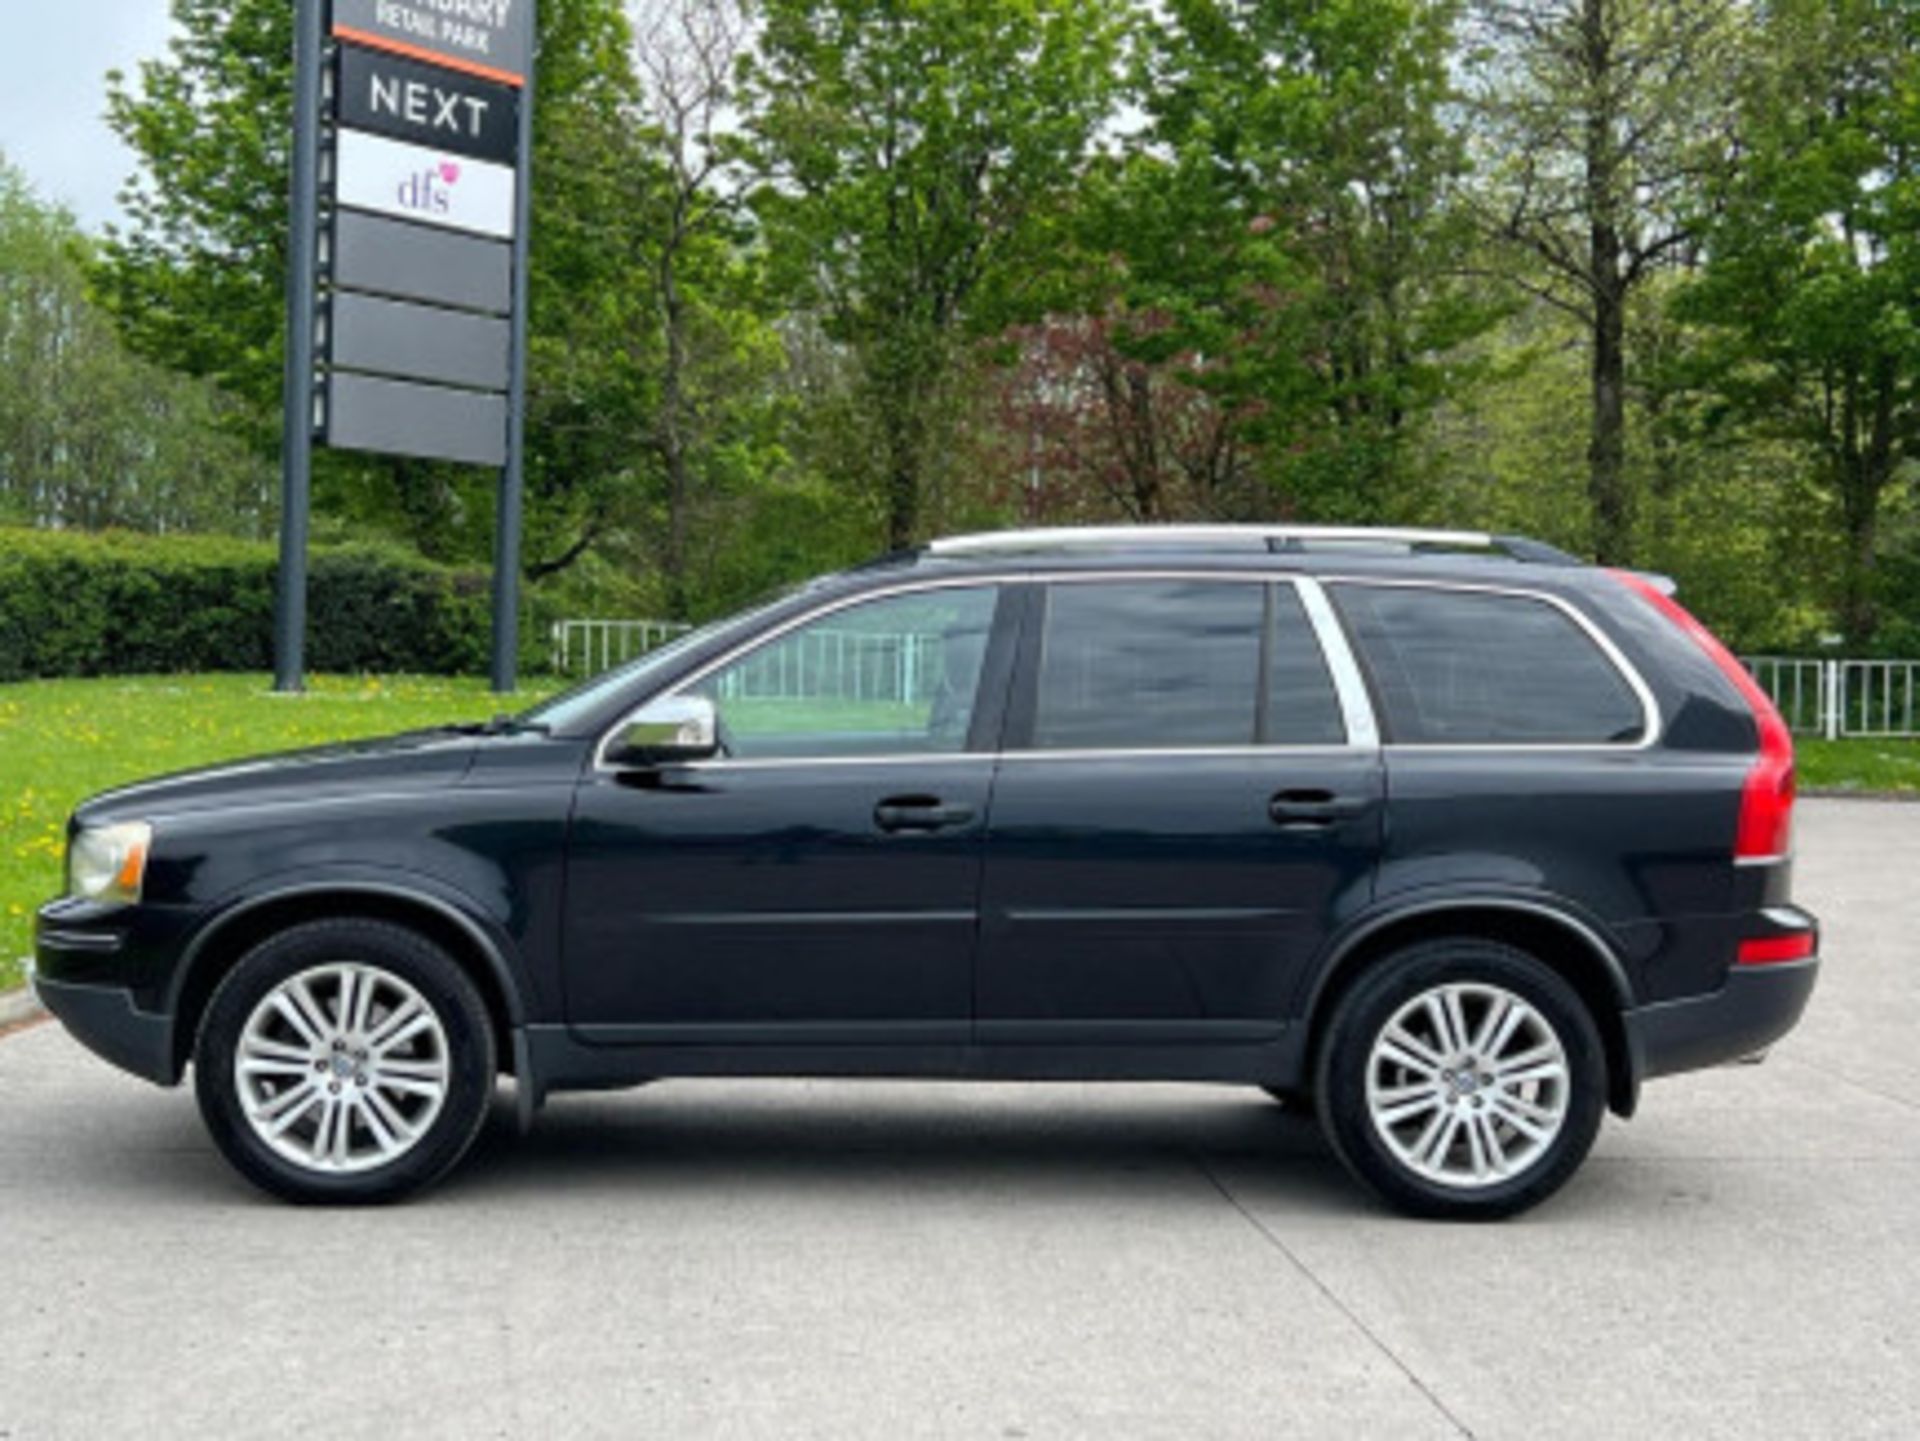 VOLVO XC90 2.4 D5 EXECUTIVE GEARTRONIC AWD, 5DR >>--NO VAT ON HAMMER--<< - Image 69 of 136